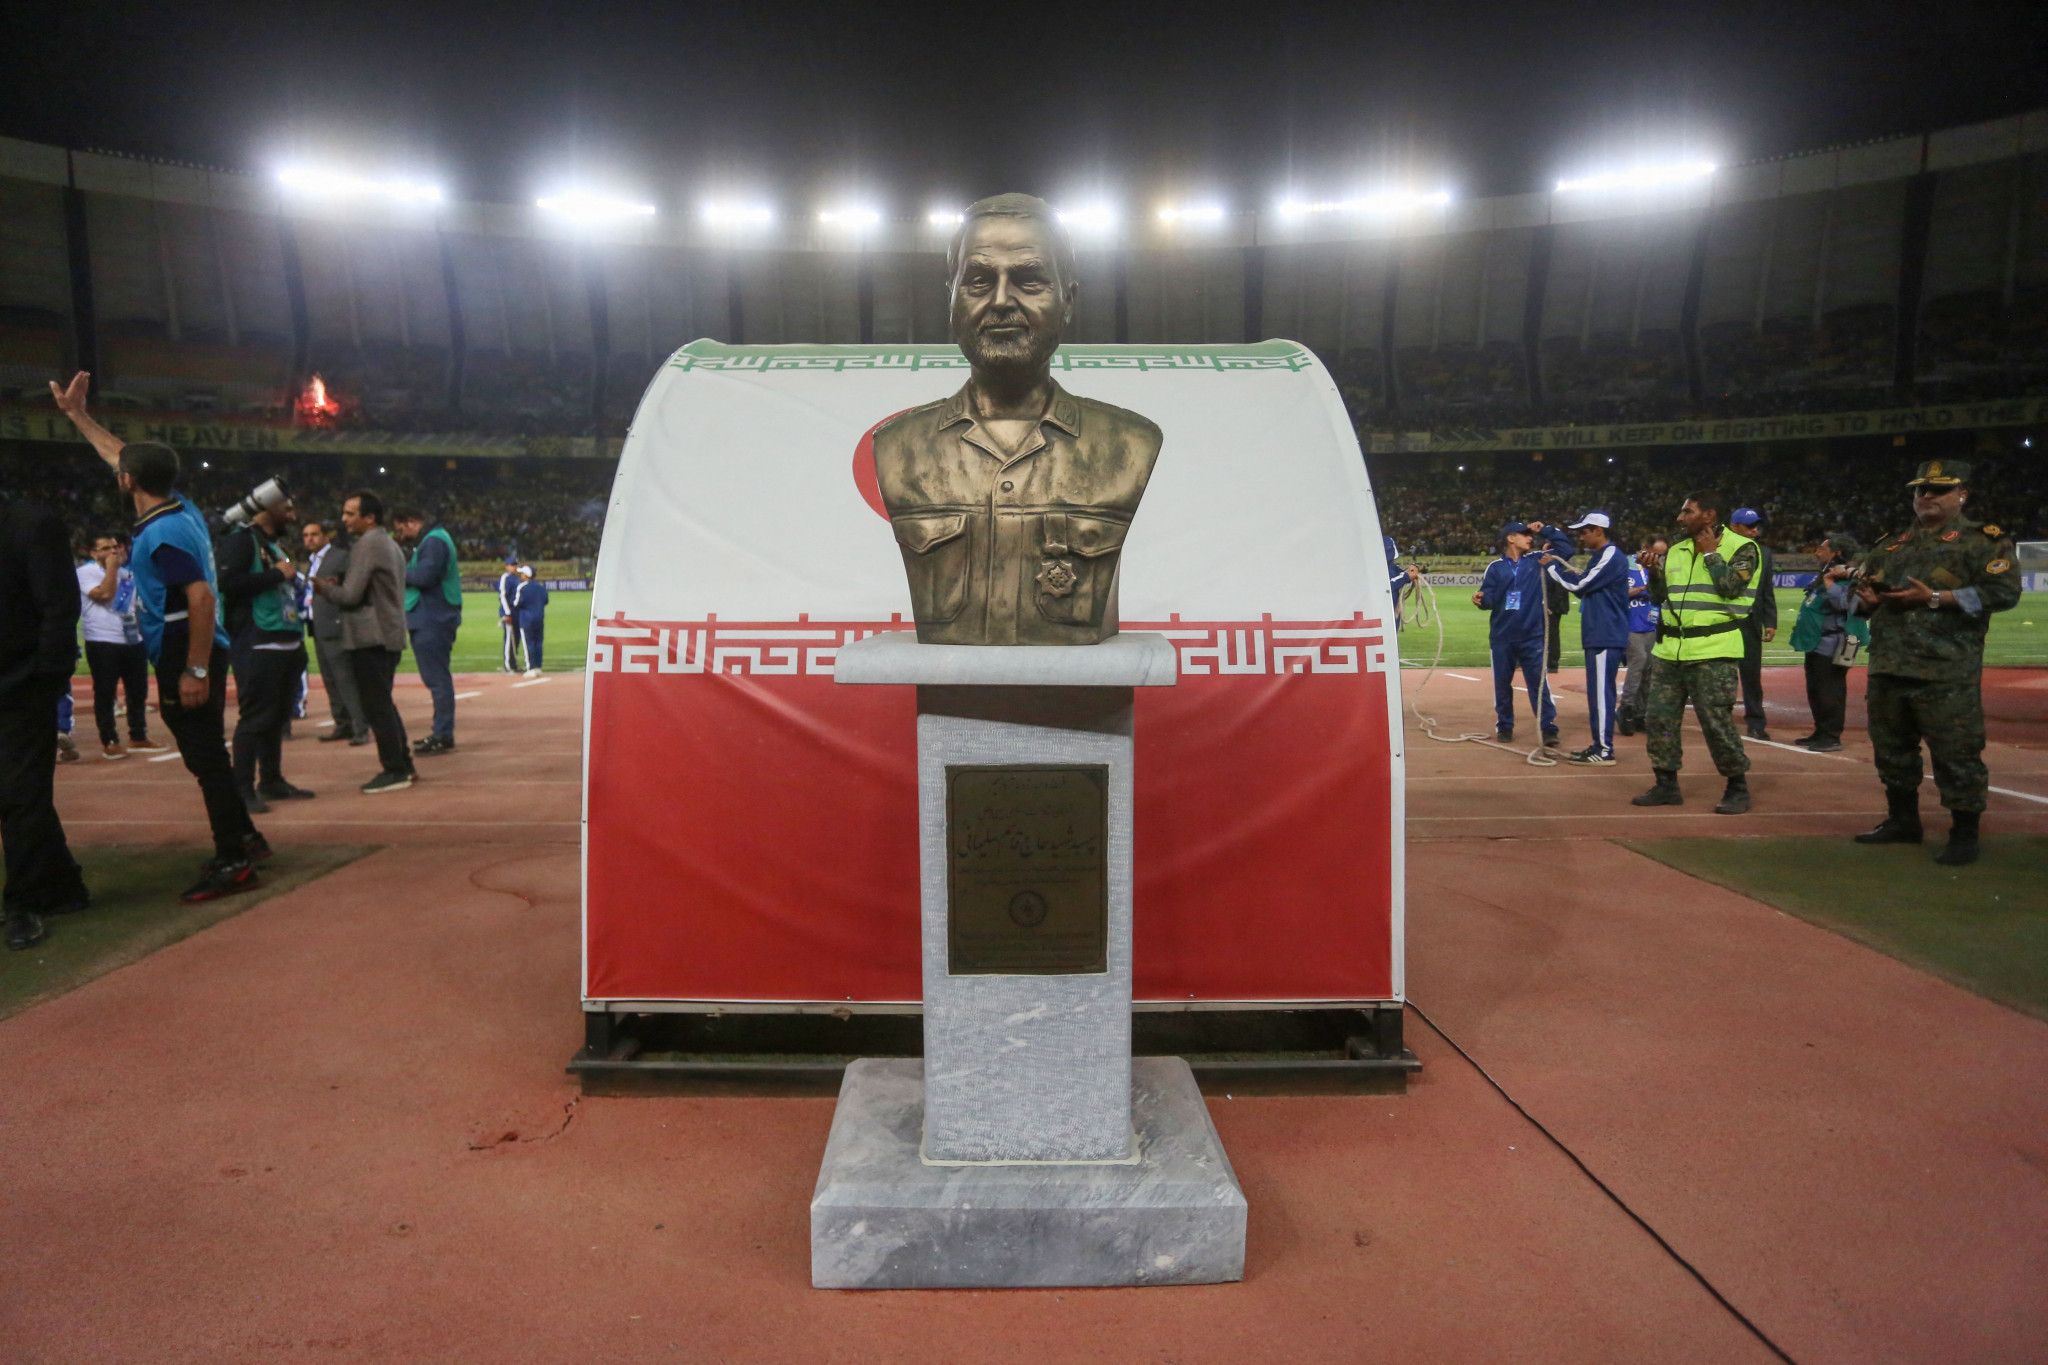 Saudi club refuse to play in Iran after bust of assassinated general appears by pitch